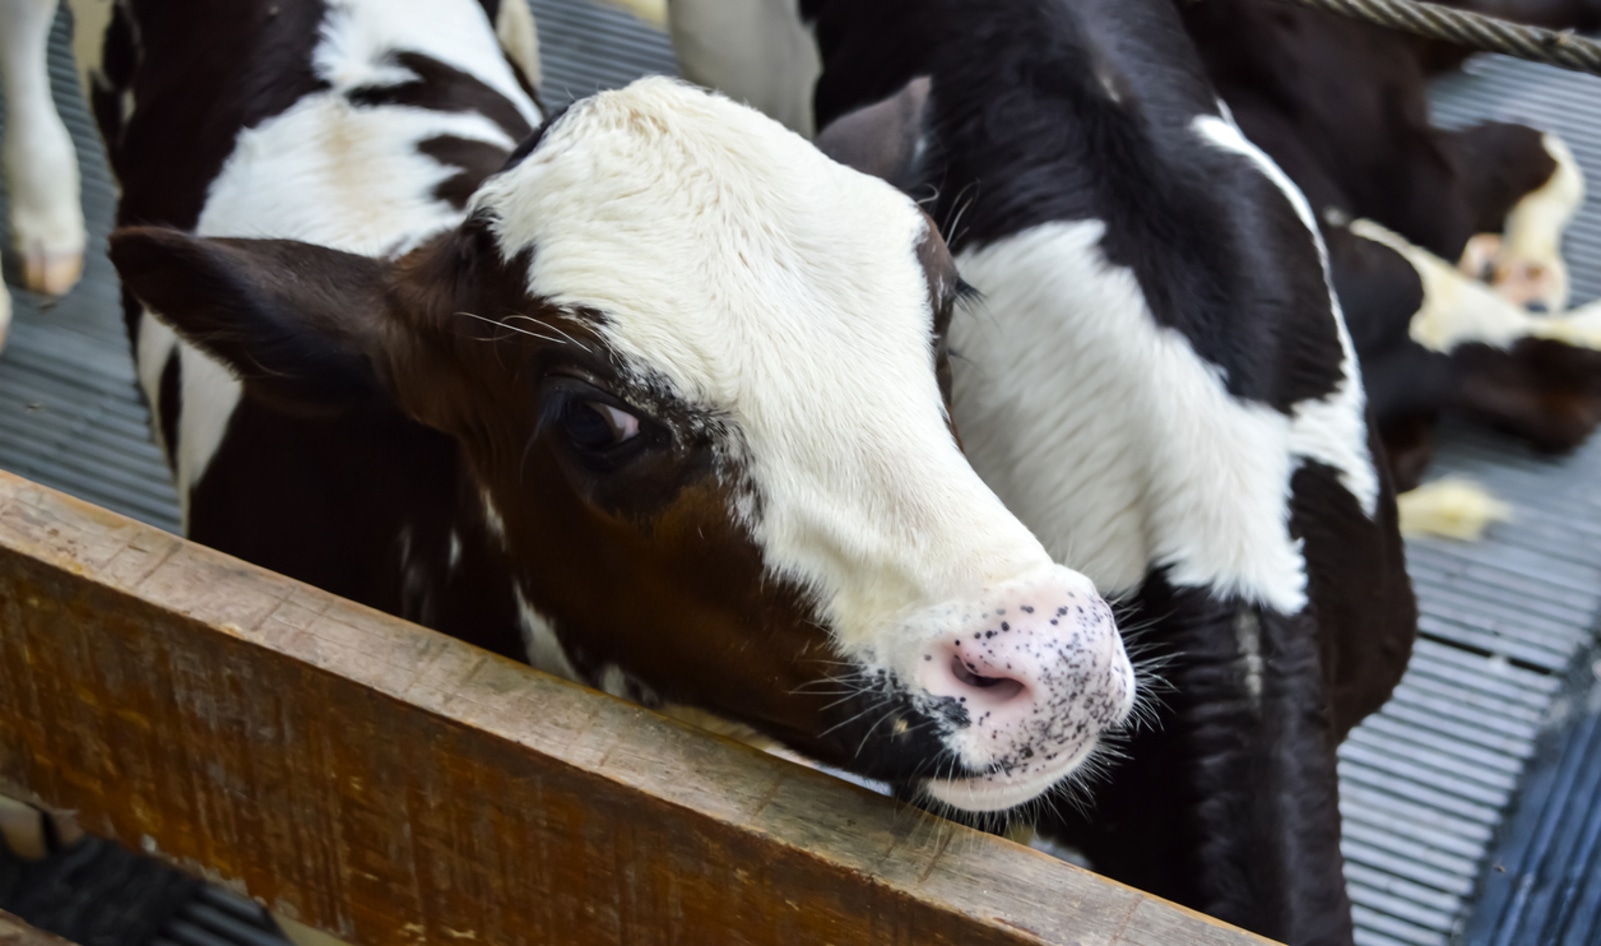 Investigation Reveals Calves Raised for Veal Being “Brutalized” and Starved to Death&nbsp;